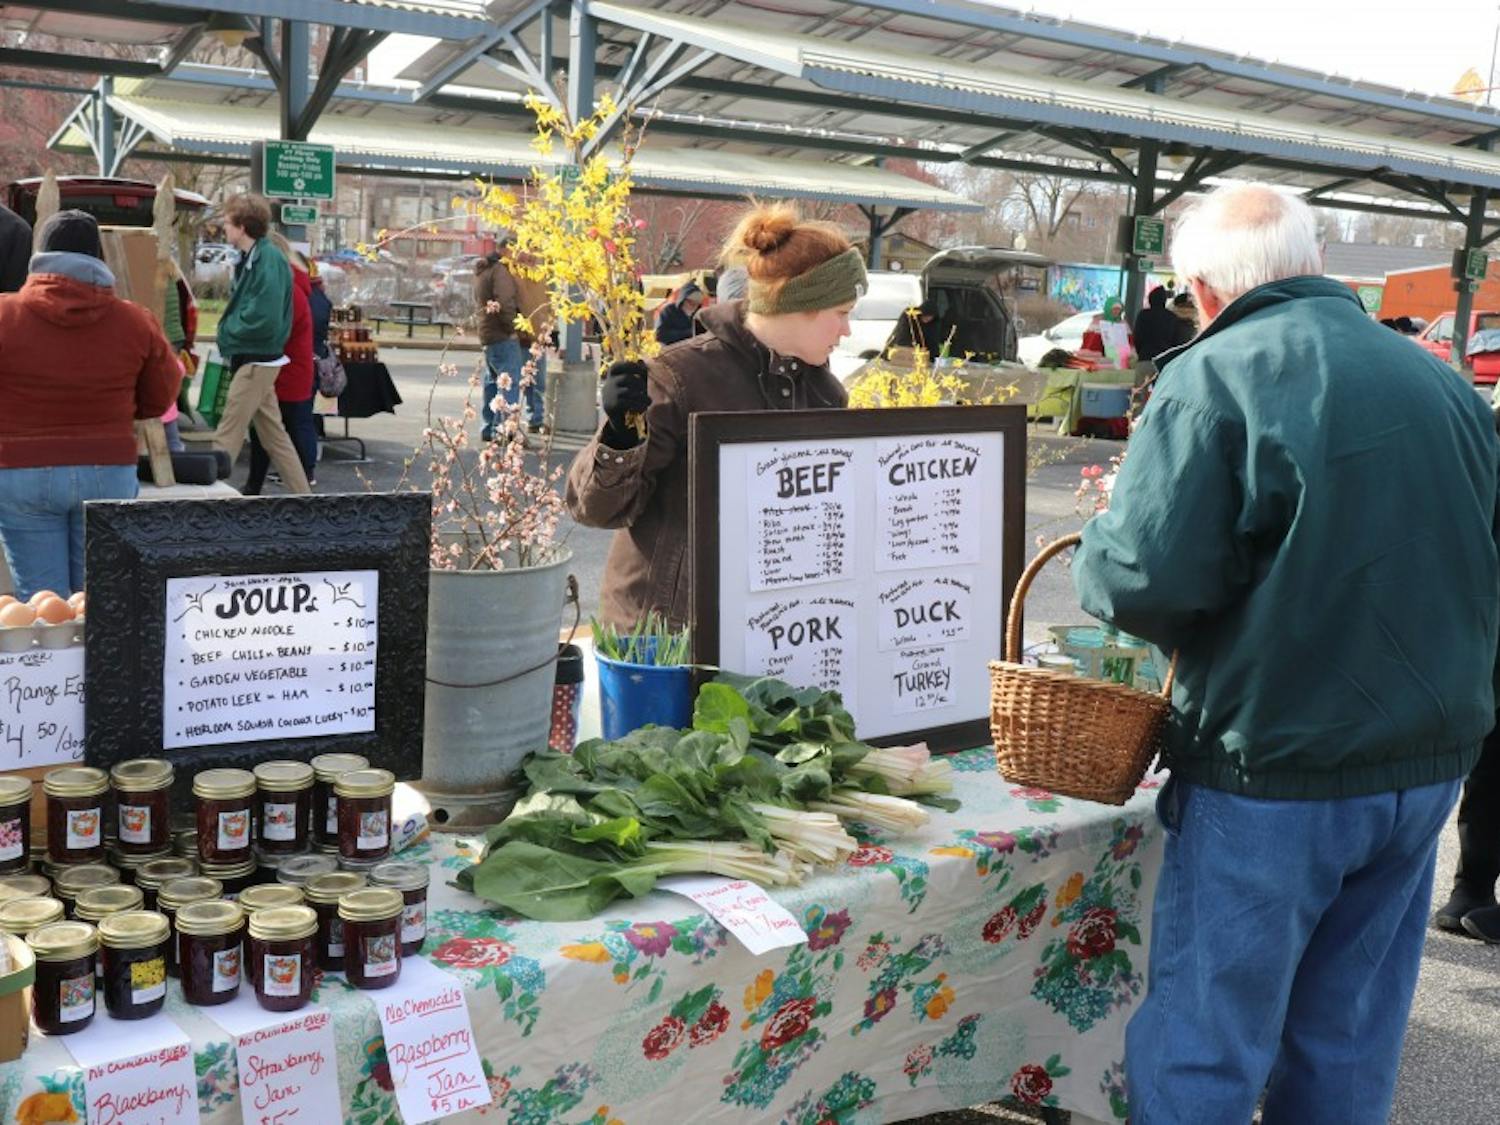 GALLERY: The return of the Bloomington Community Farmers' Market